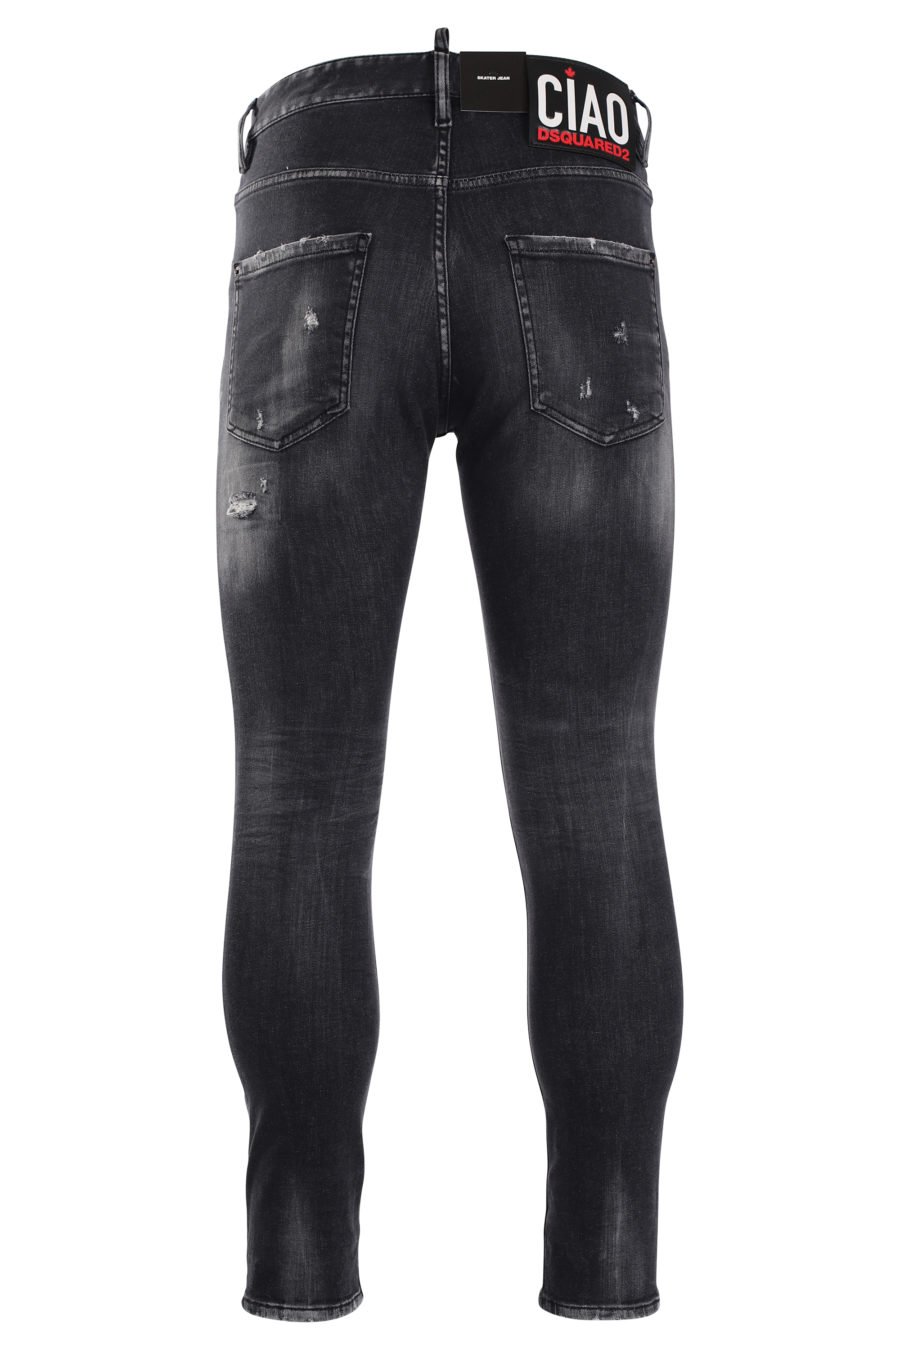 Denim skater trousers with black worn-out jeans and black "D2" logo - IMG 9987